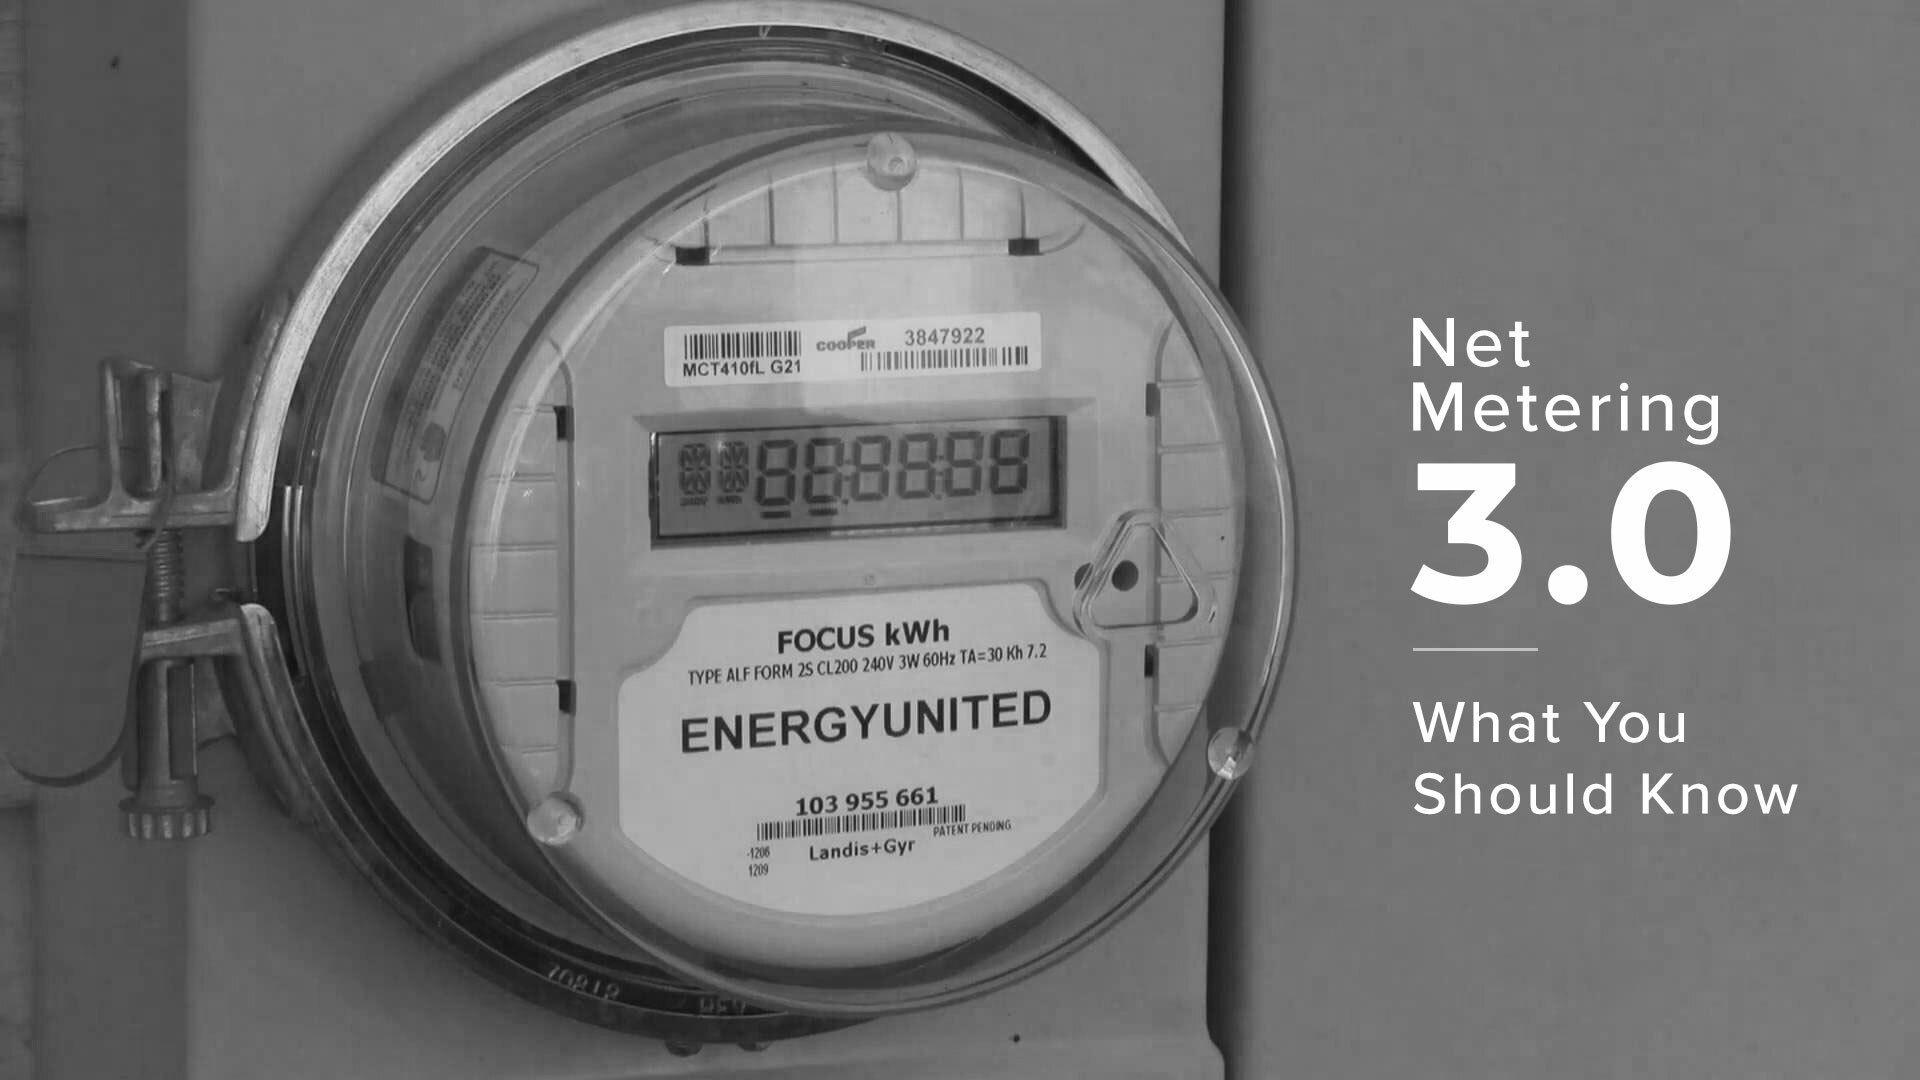 An image highlighting key information about NEM 3.0 and the significance of net metering.